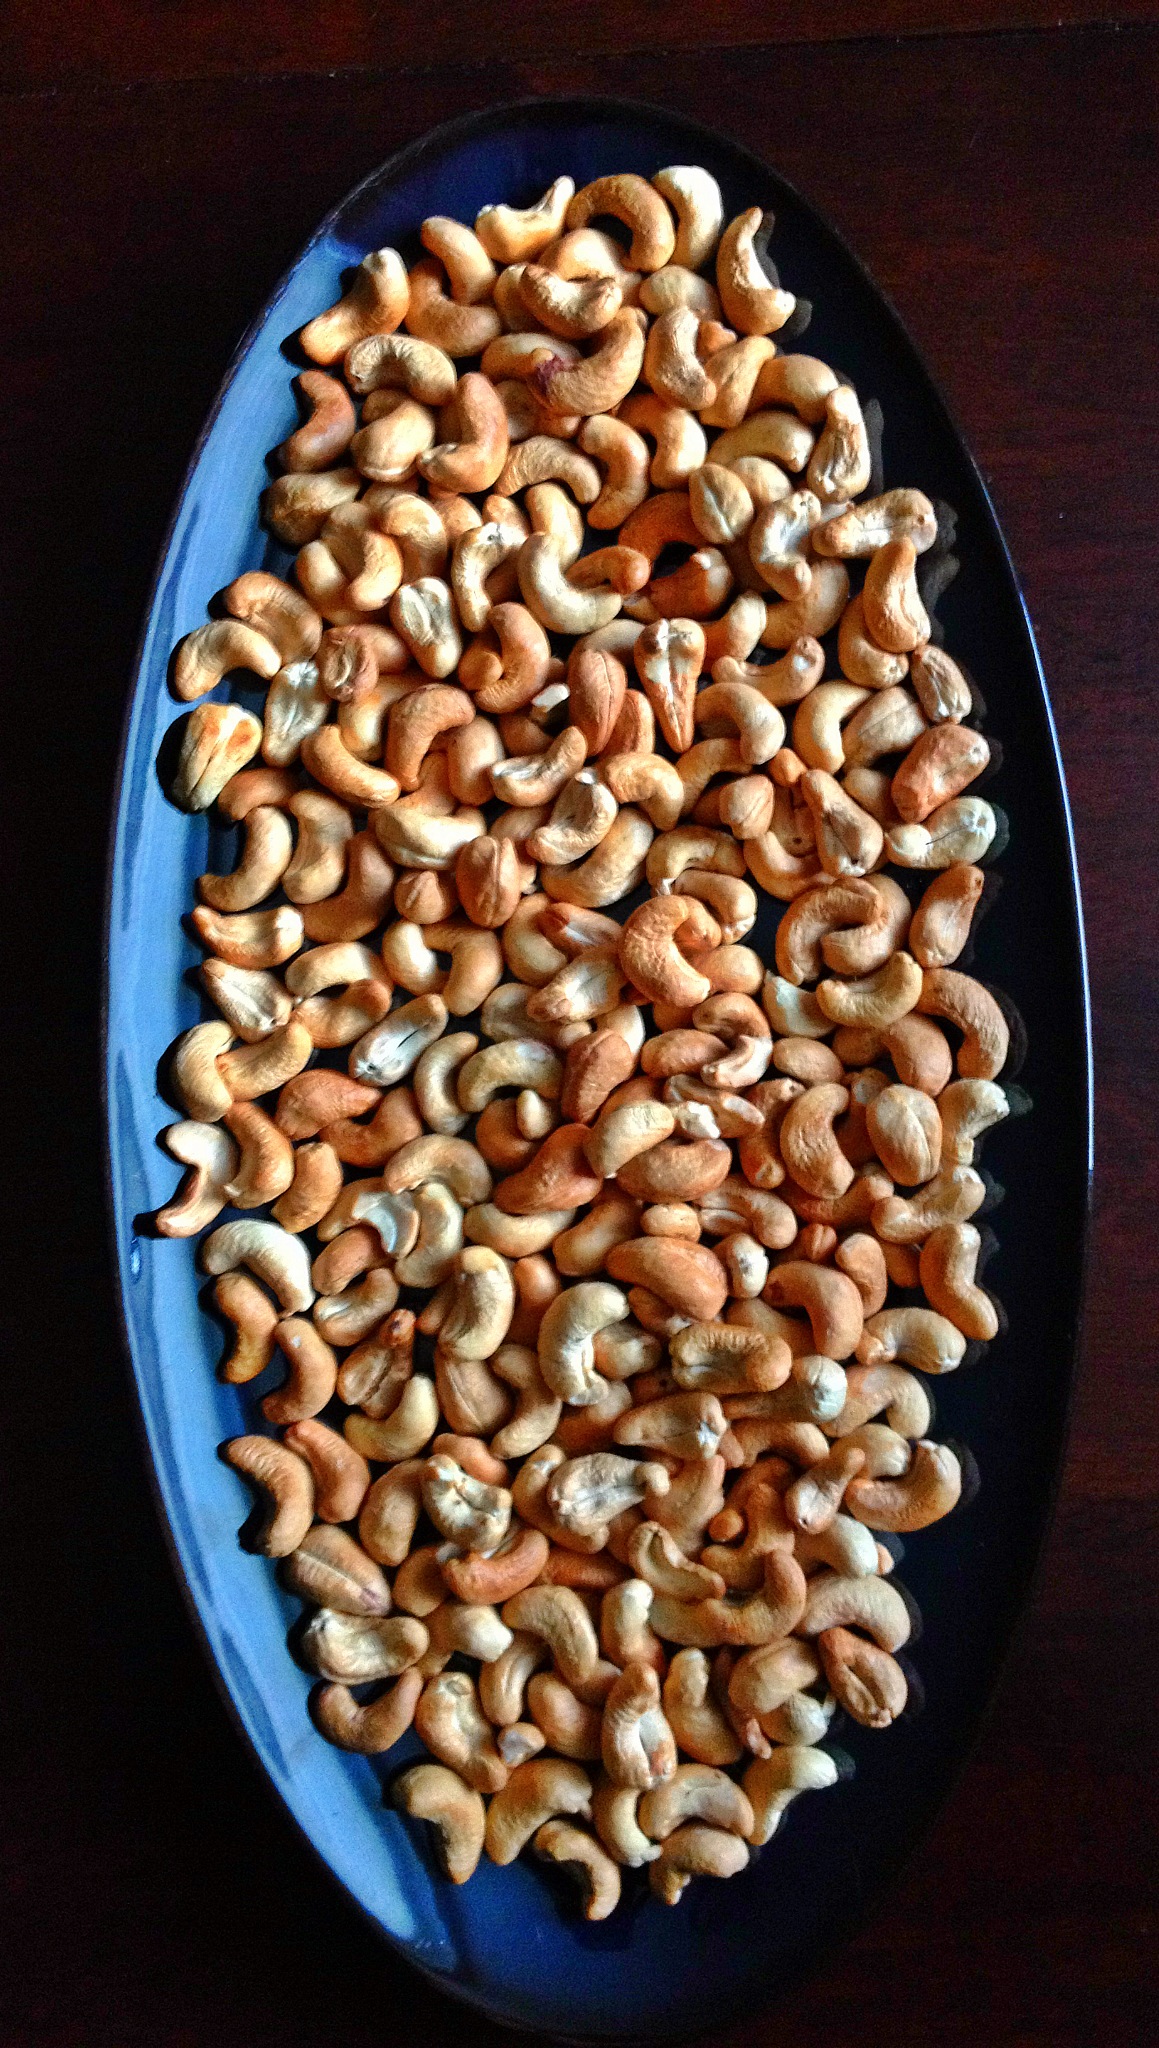 Oven-roasted cashews cooling on a platter